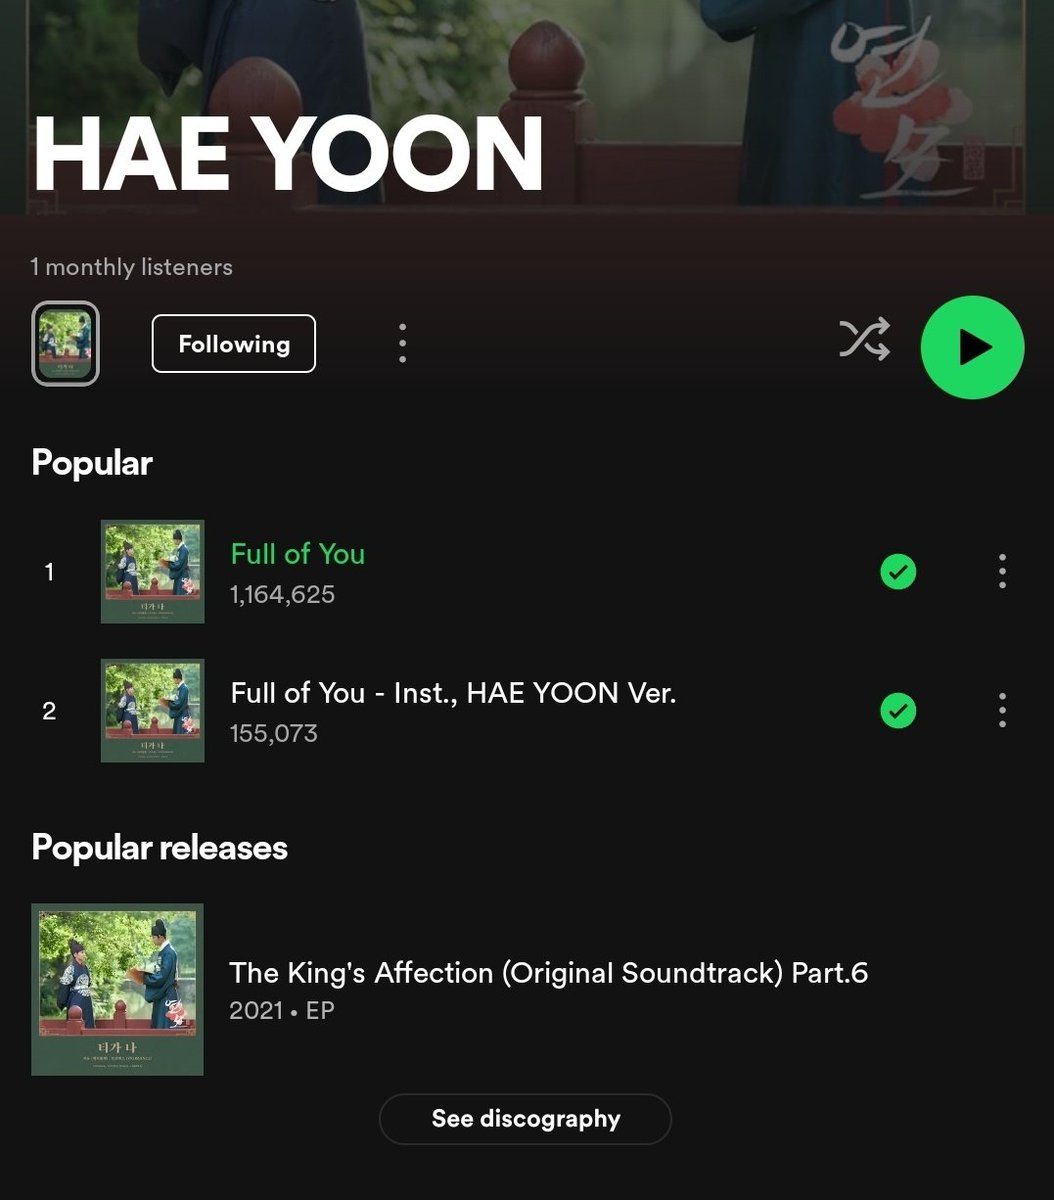 HAEYOON's song is now under a new Spotify profile (previously from HAEYOON (Cherry Bullet) to HAE YOON)

You can follow her new profile here: open.spotify.com/artist/2hD3aiY…

#HAEYOON #해윤 #ParkHaeyoon #박해윤